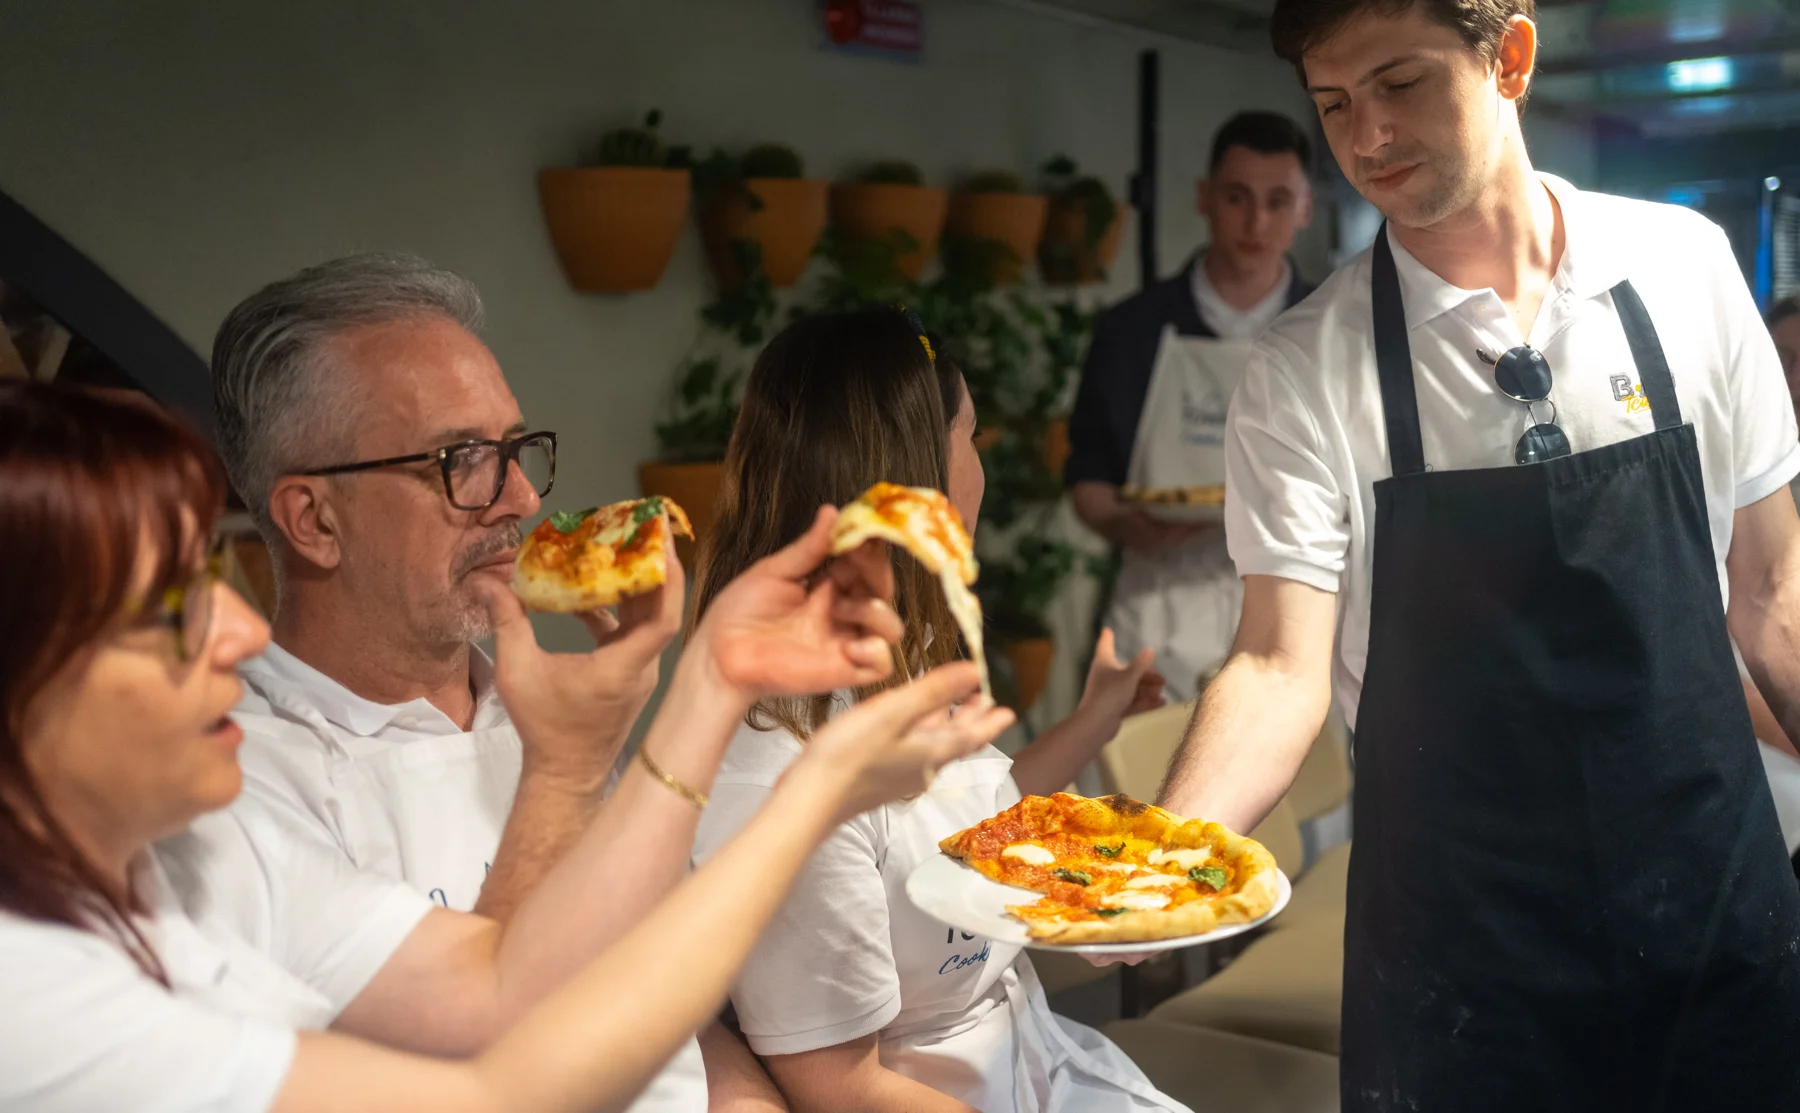 Gelato and pizza making class in downtown Milan - 1519401